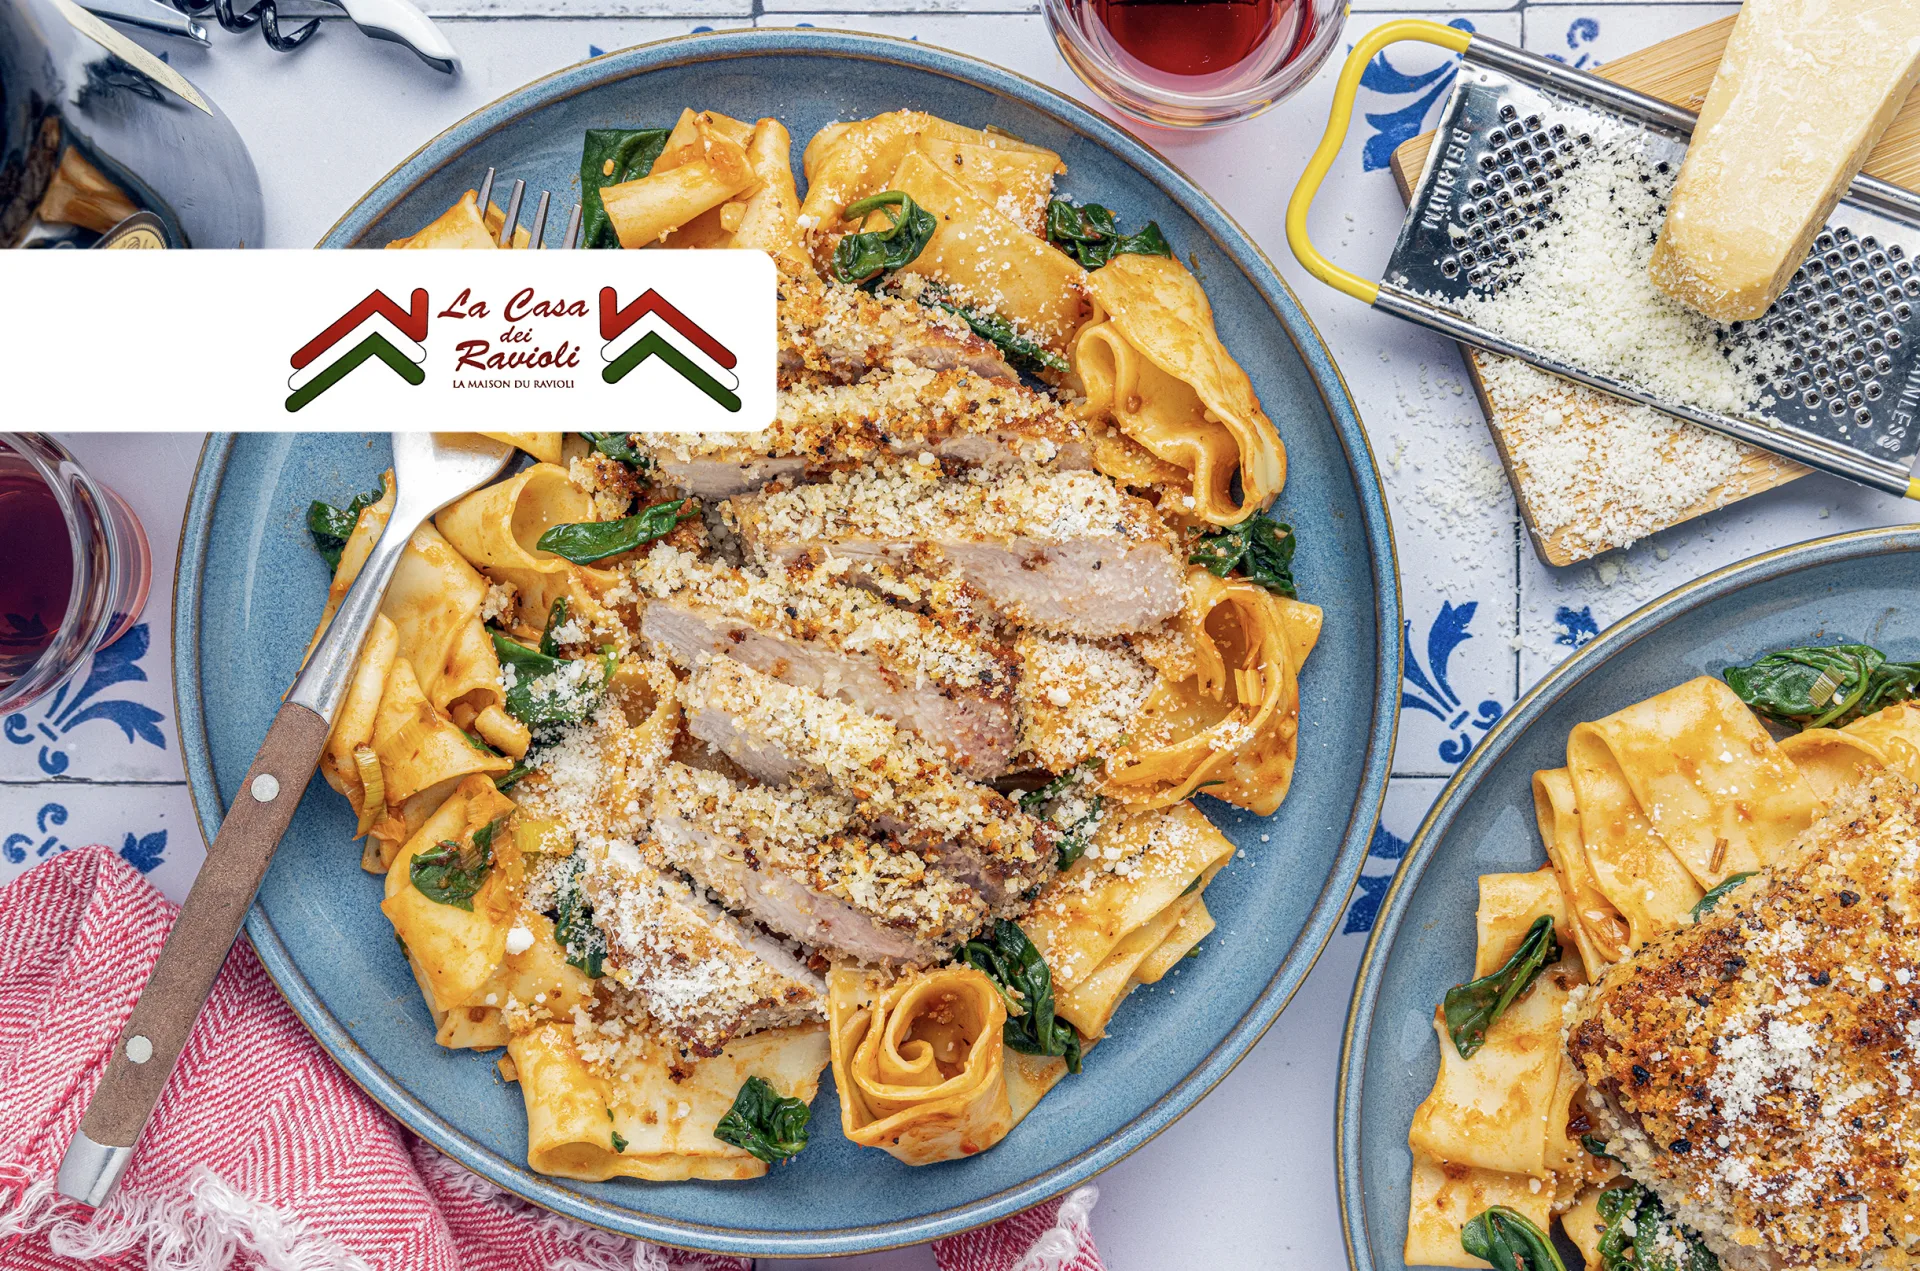 Grana Padano-Crusted Pork Chops over Spinach & Leek Pappardelle